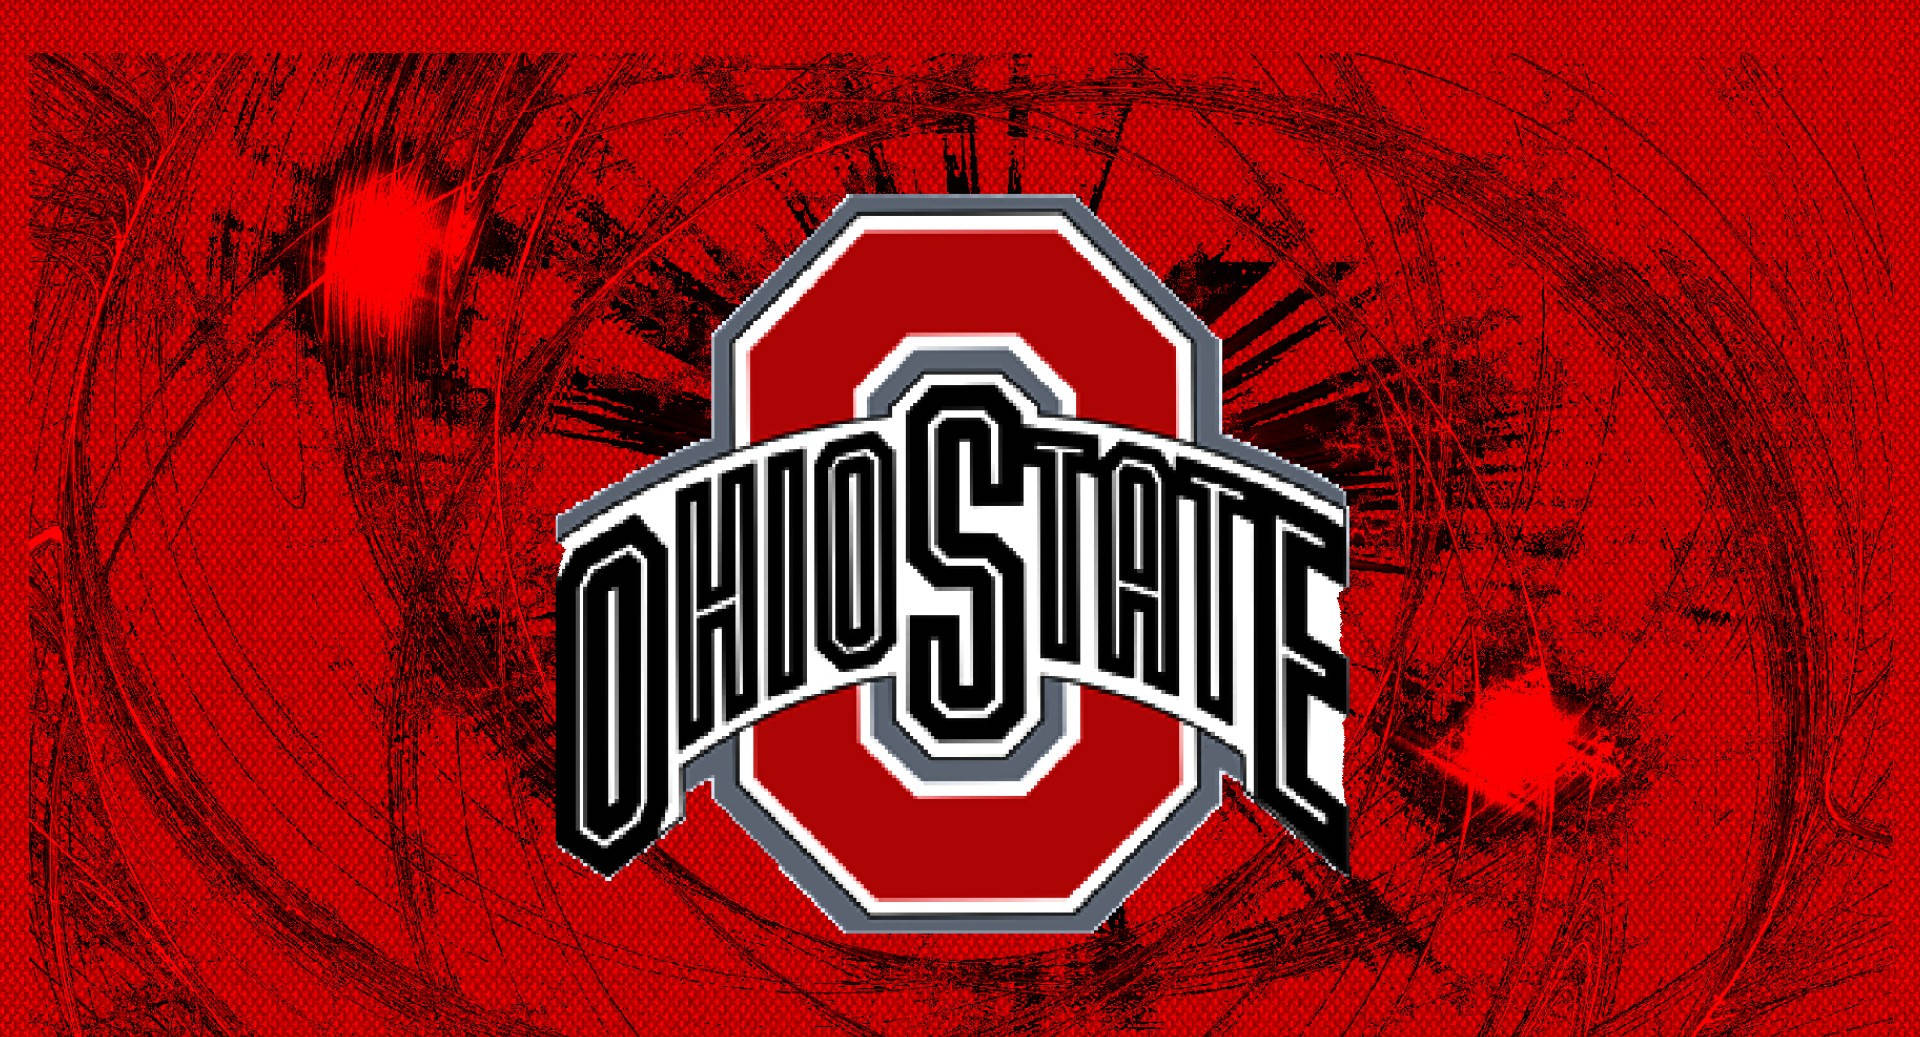 Ohio State University Scratched Red Picture